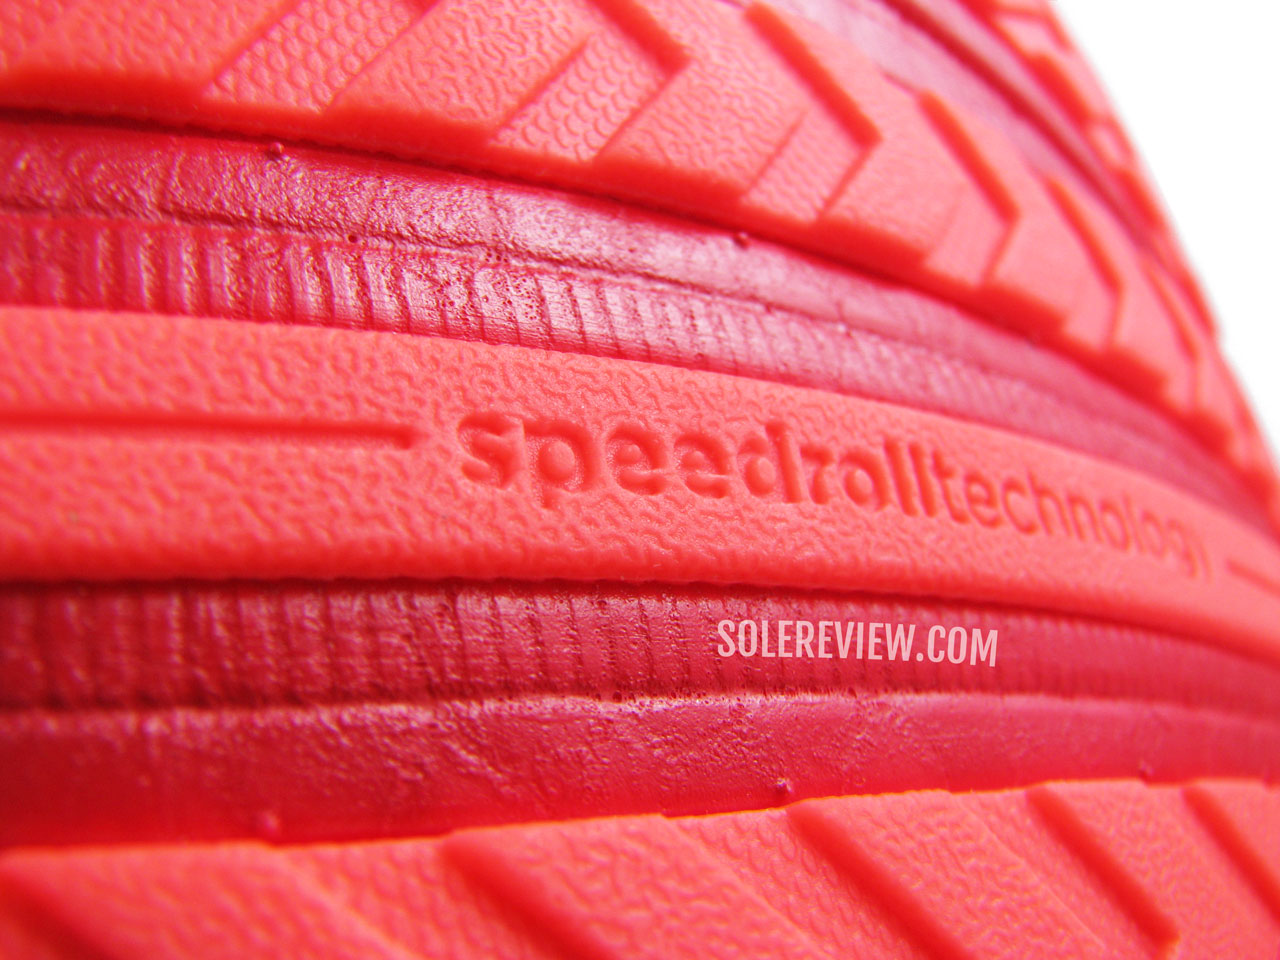 The speedroll forefoot of the Saucony Endorphin Speed 3.